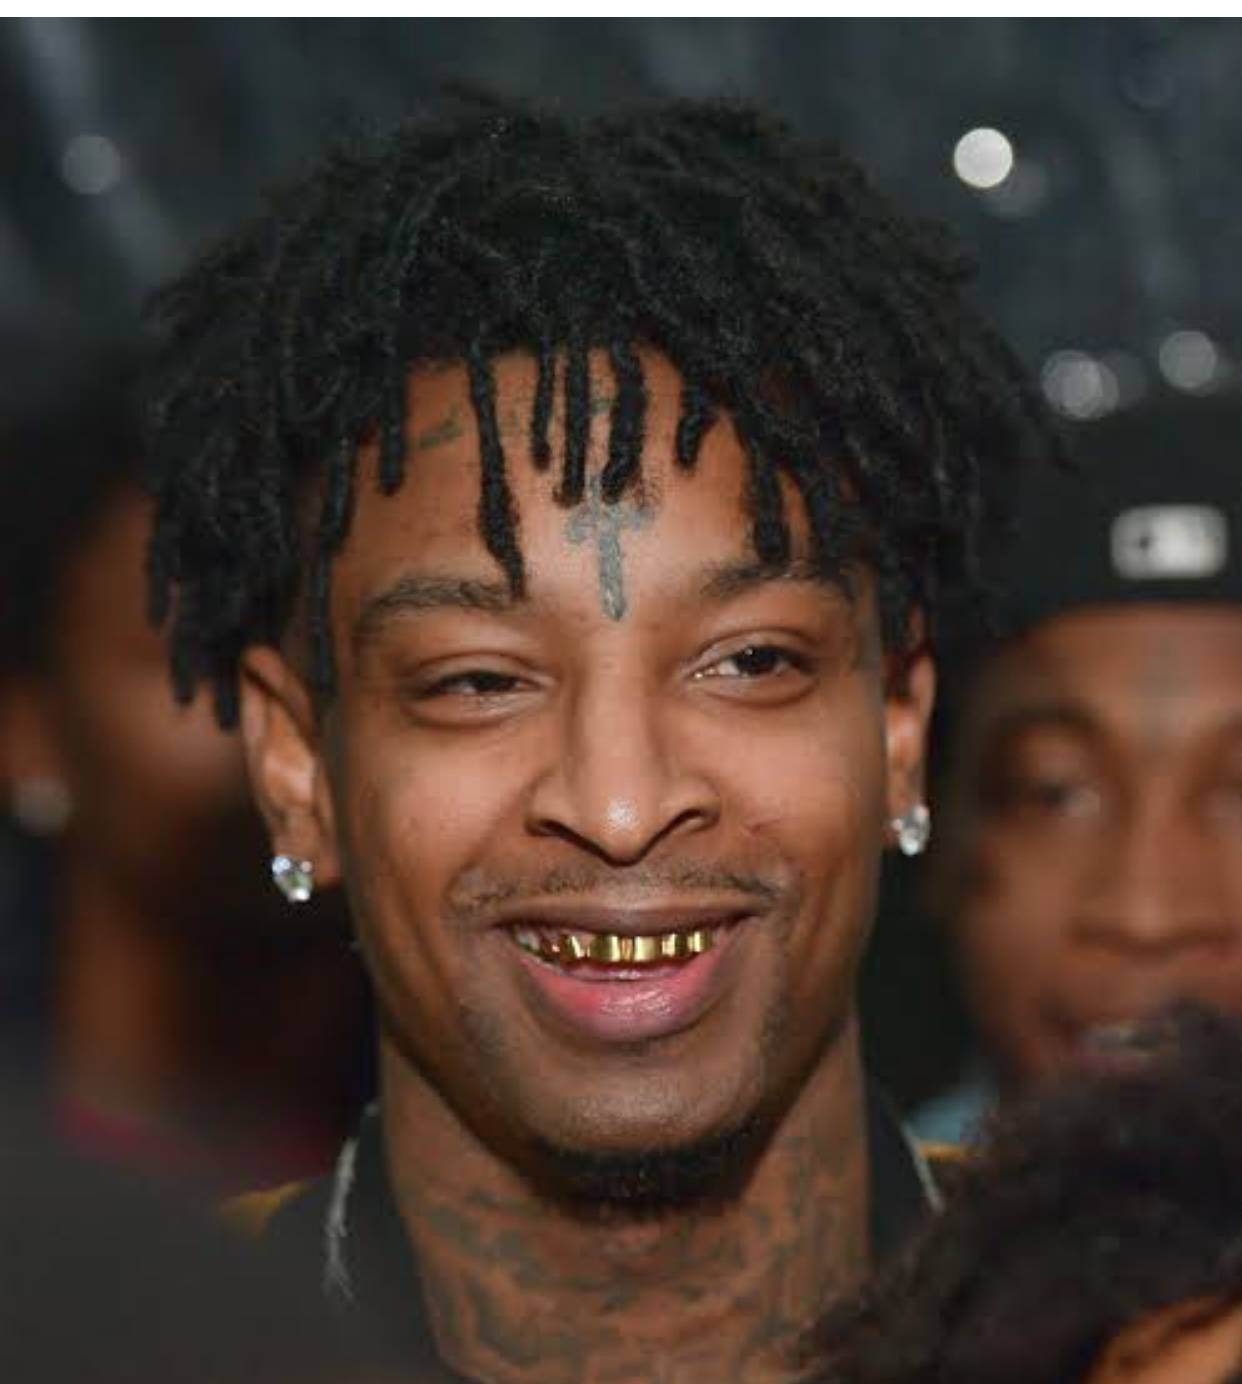 21 savage Confronts wack 100 for accusing him of snitching on YSL